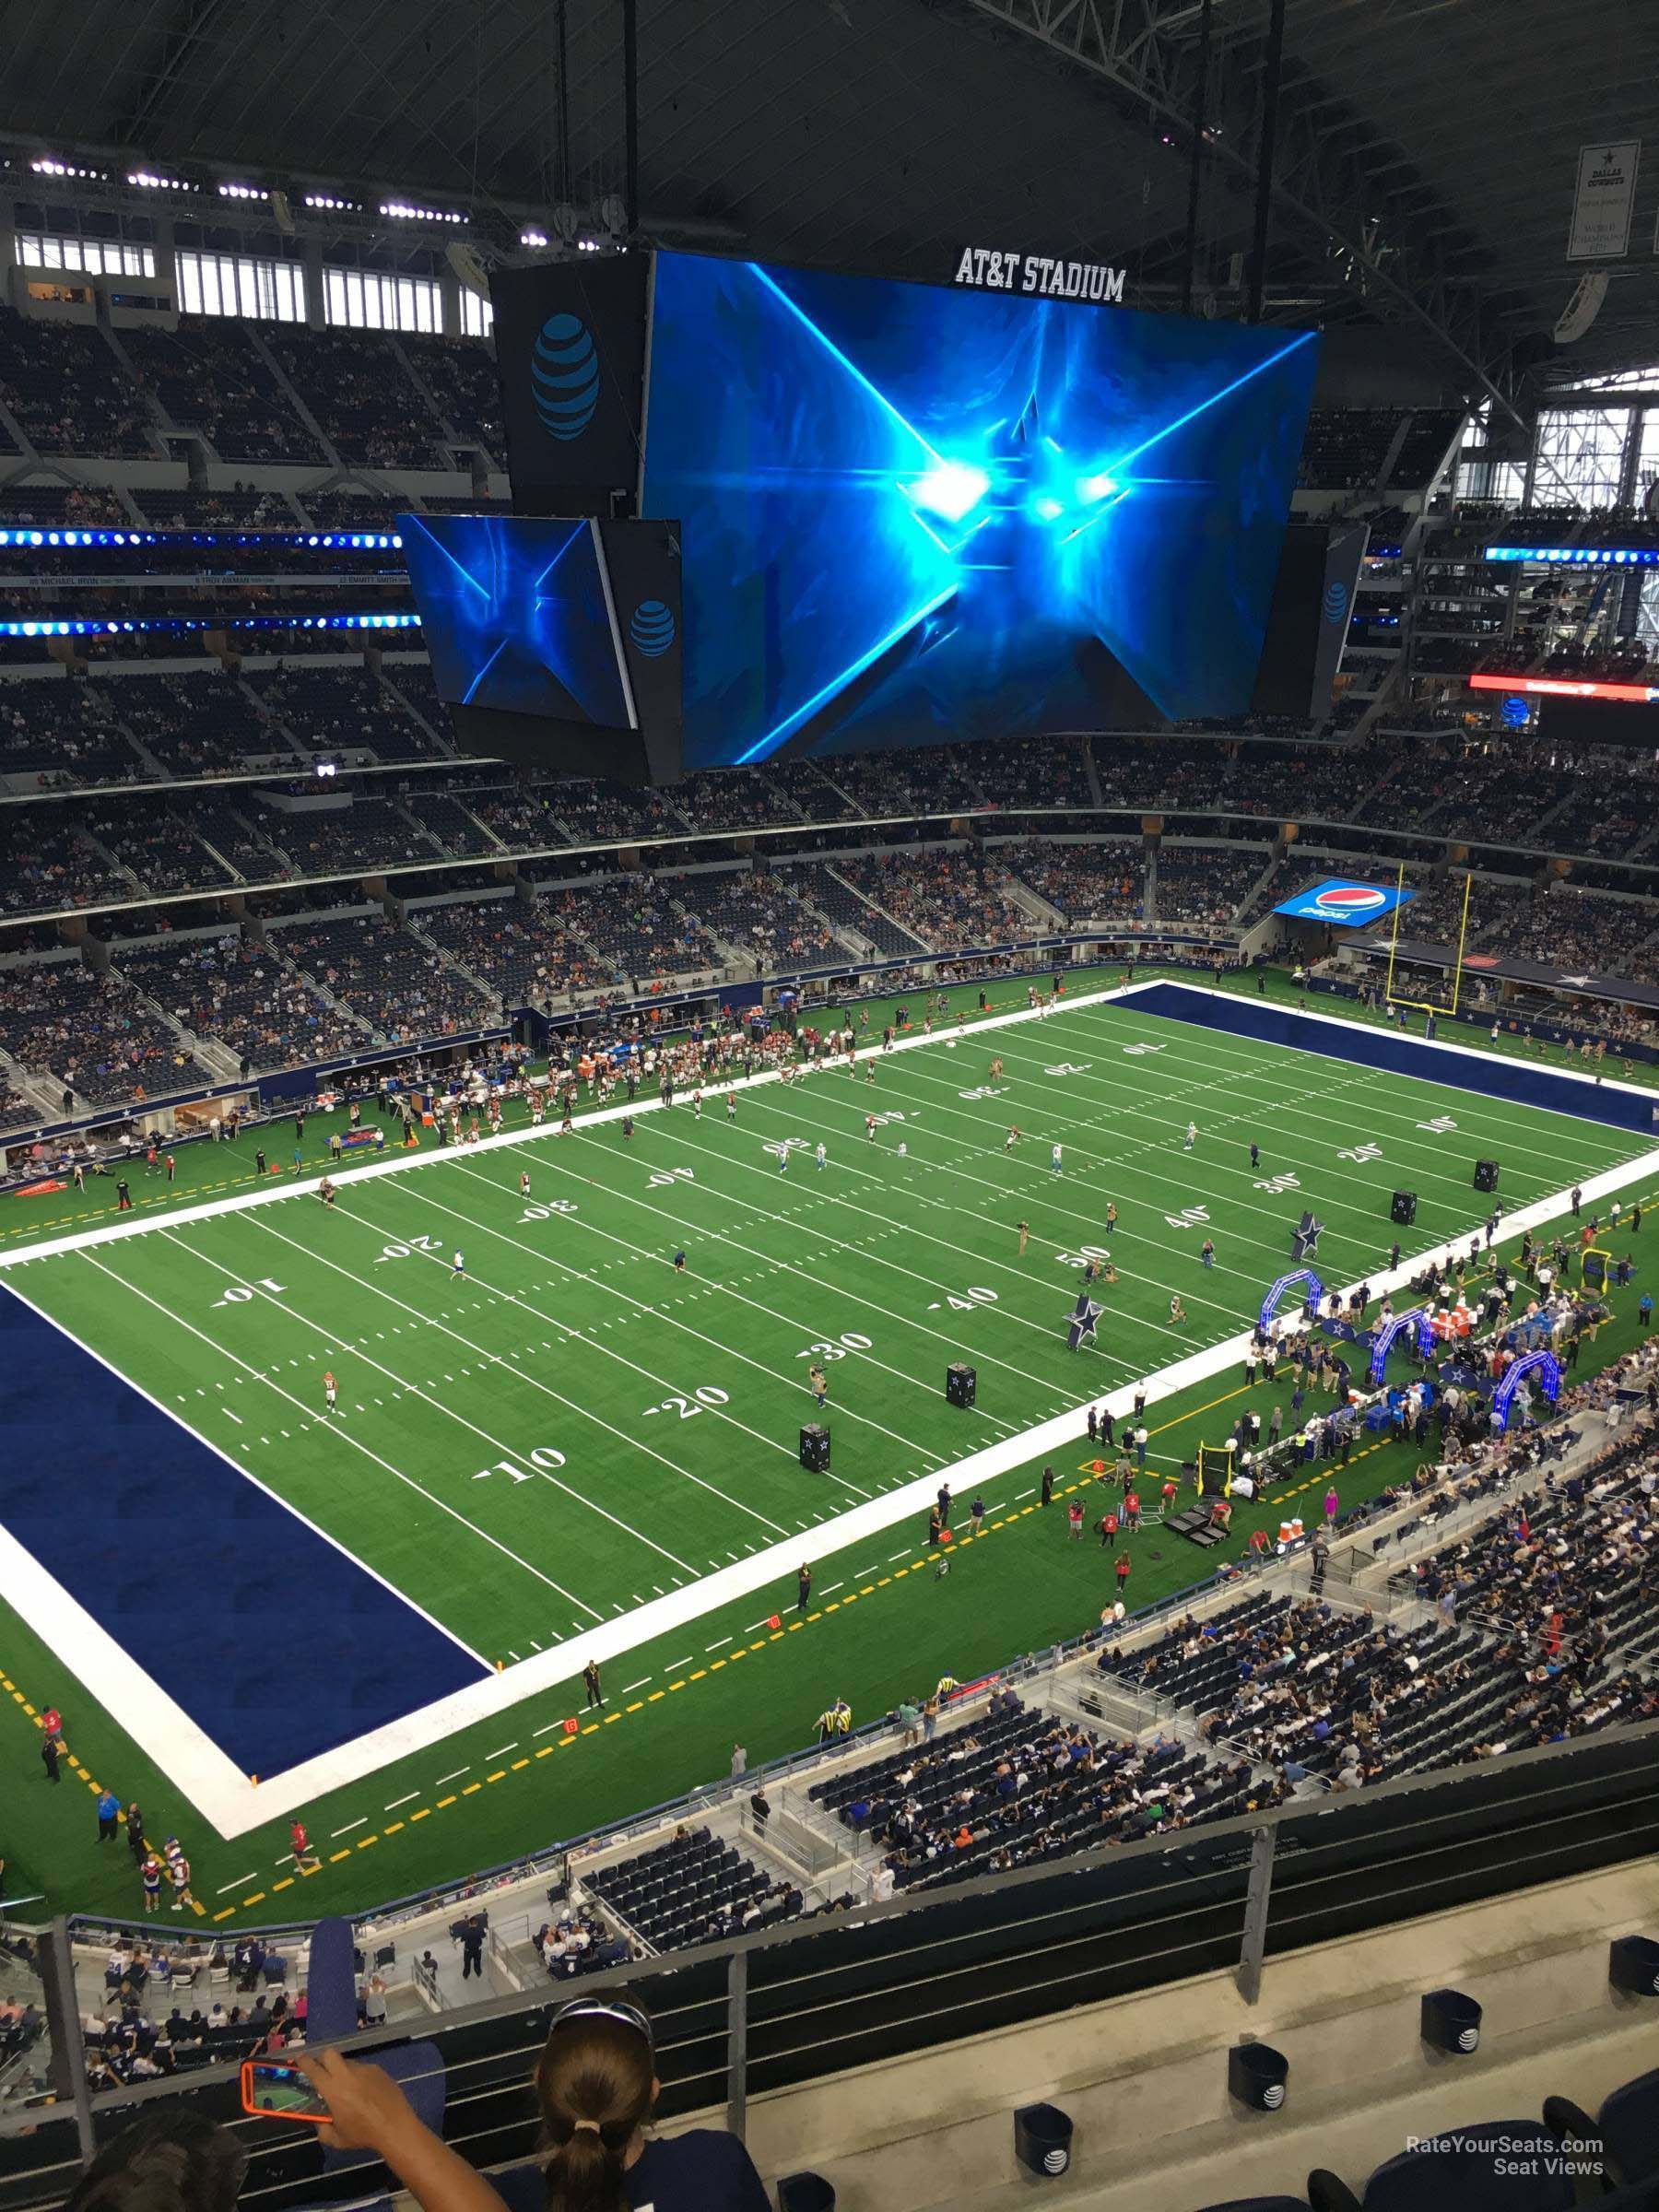 section 420, row 4 seat view  for football - at&t stadium (cowboys stadium)